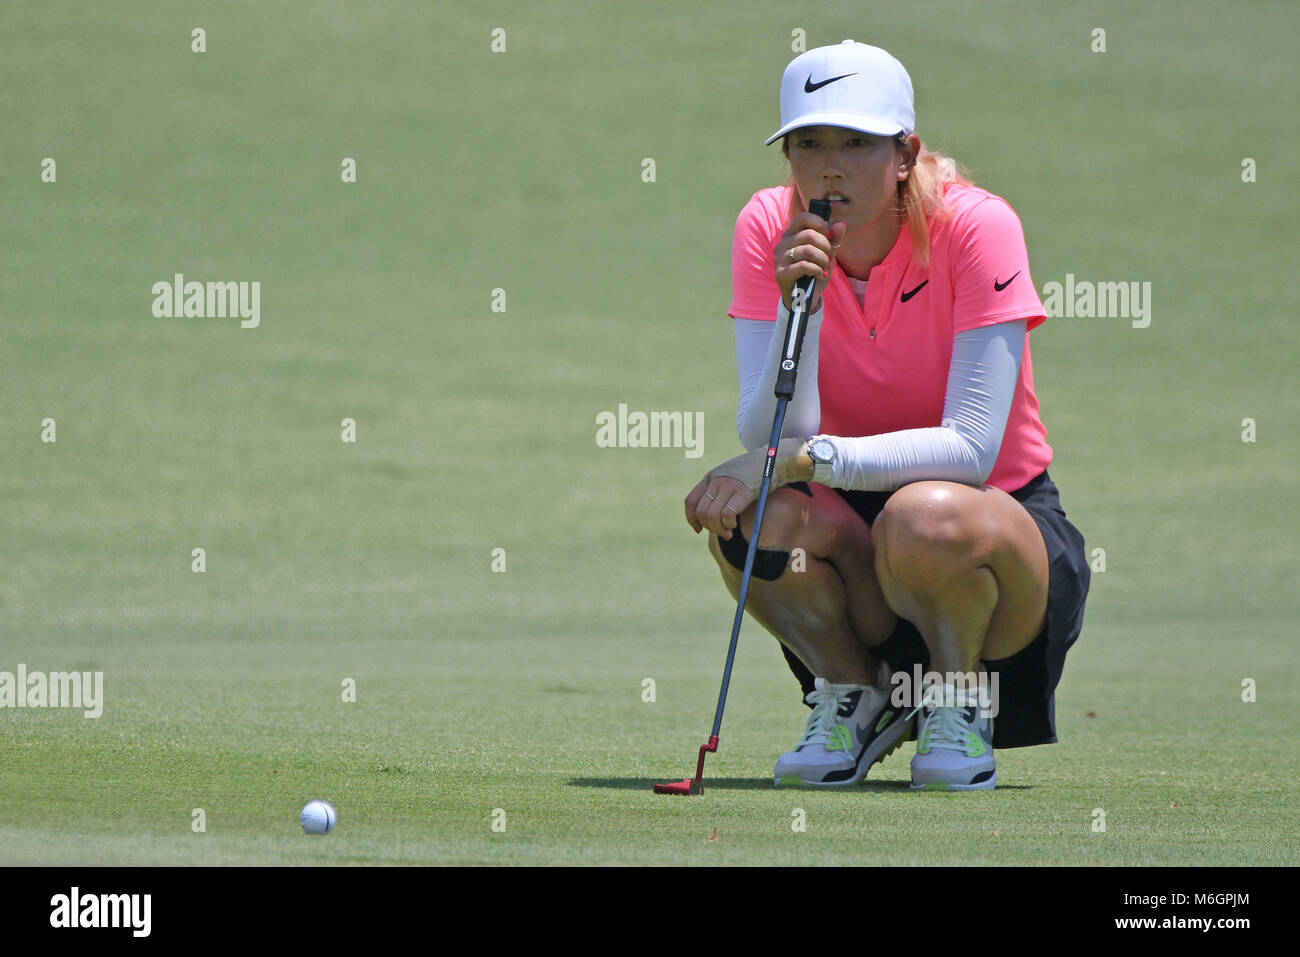 Singapore. 4th Mar, 2018. Michelle Wie of the United States competes during the HSBC Women's World Championship at Sentosa Golf Club in Singapore, on March 4, 2018. Credit: Then Chih Wey/Xinhua/Alamy Live News Stock Photo